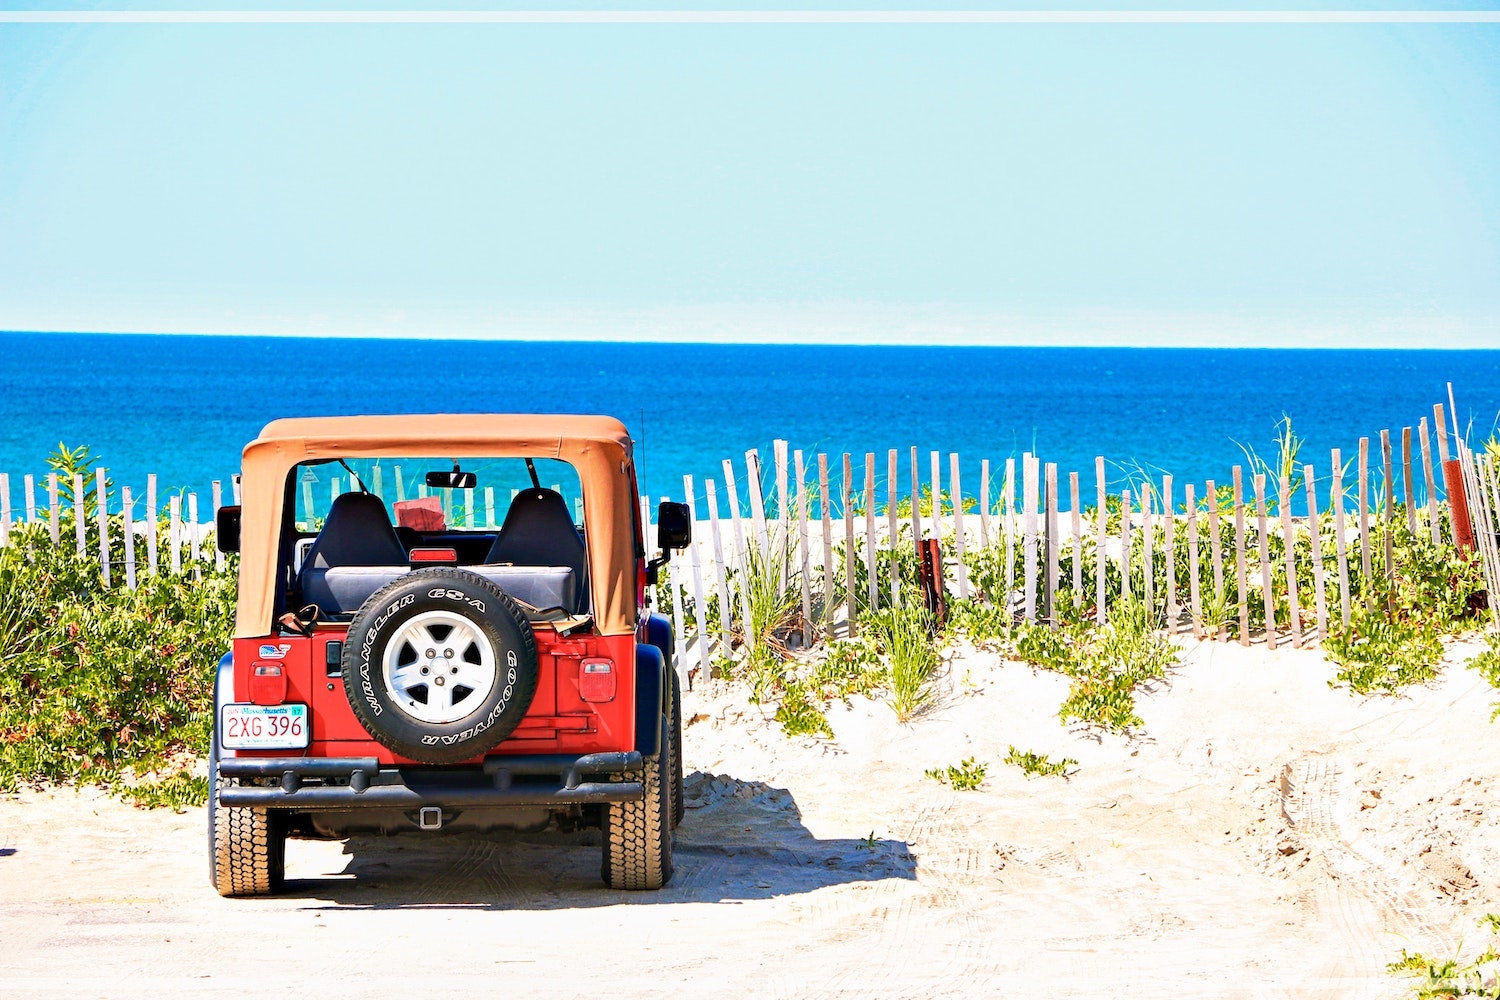 A red Jeep Wrangler YJ parked on the beach, a blue ocean visible in the background.